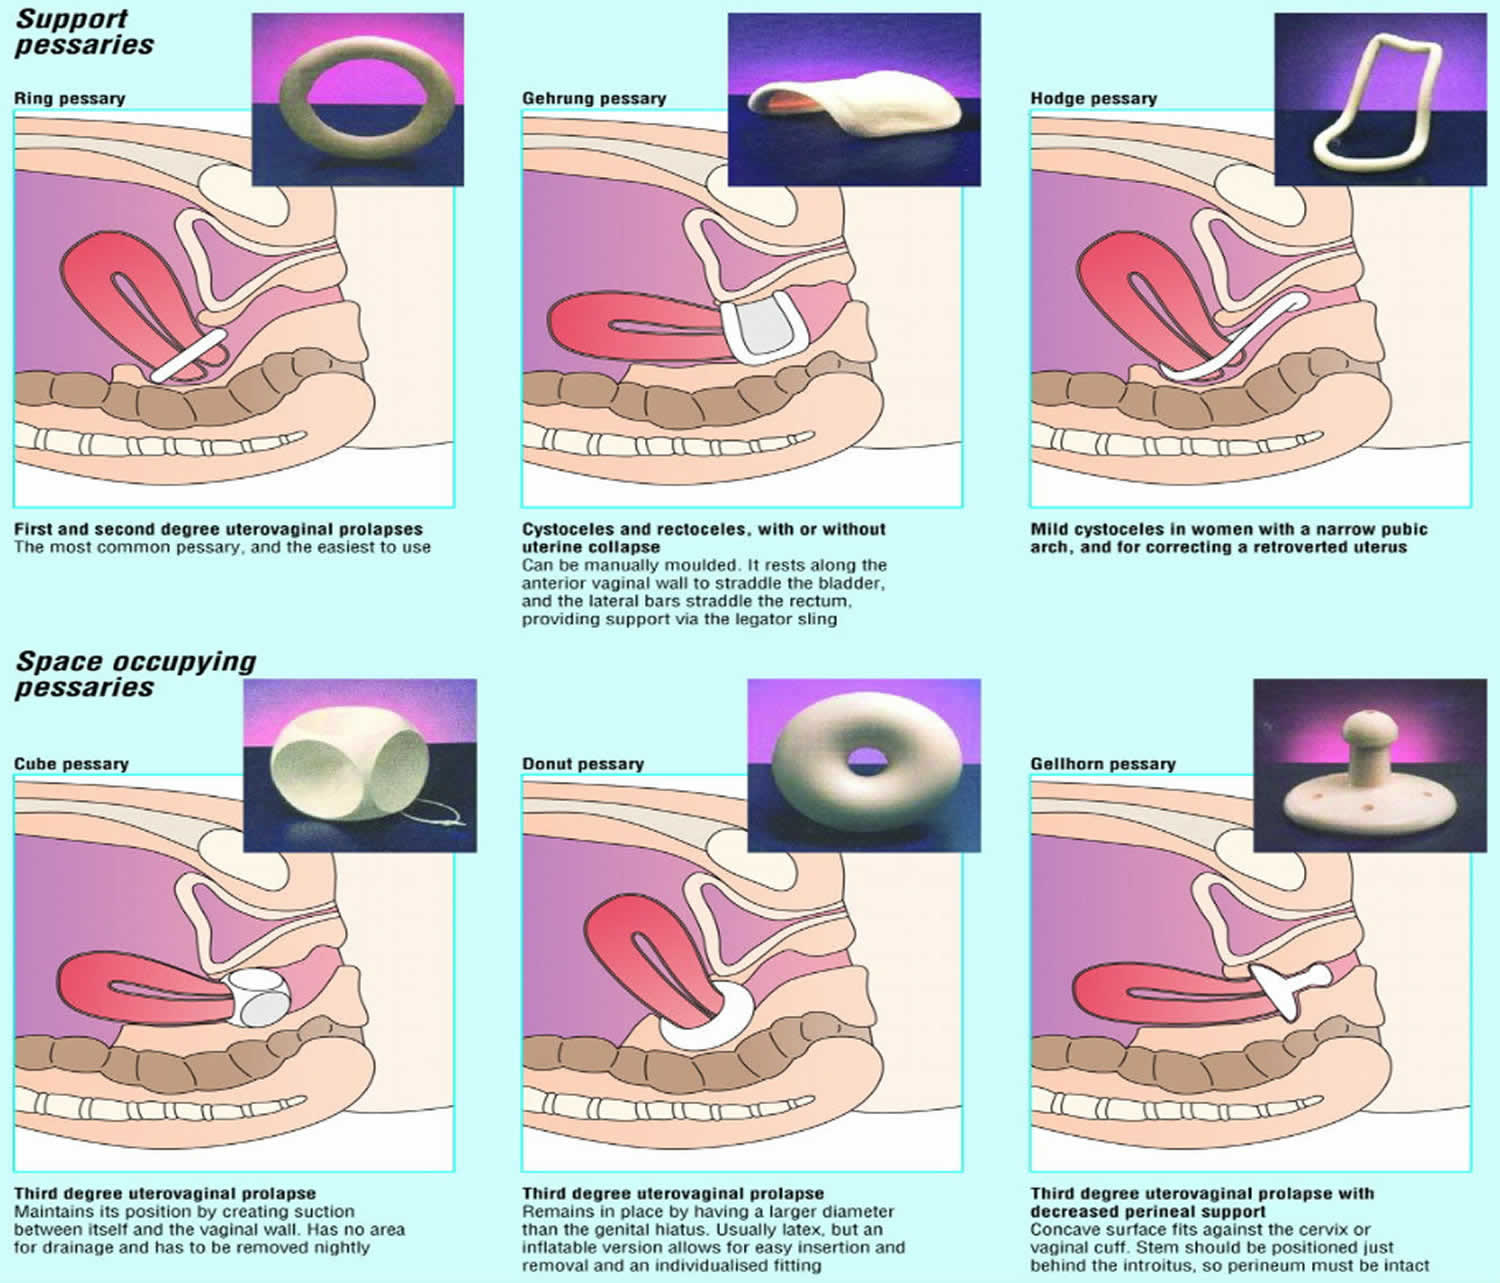 Types of pessaries - Mayo Clinic